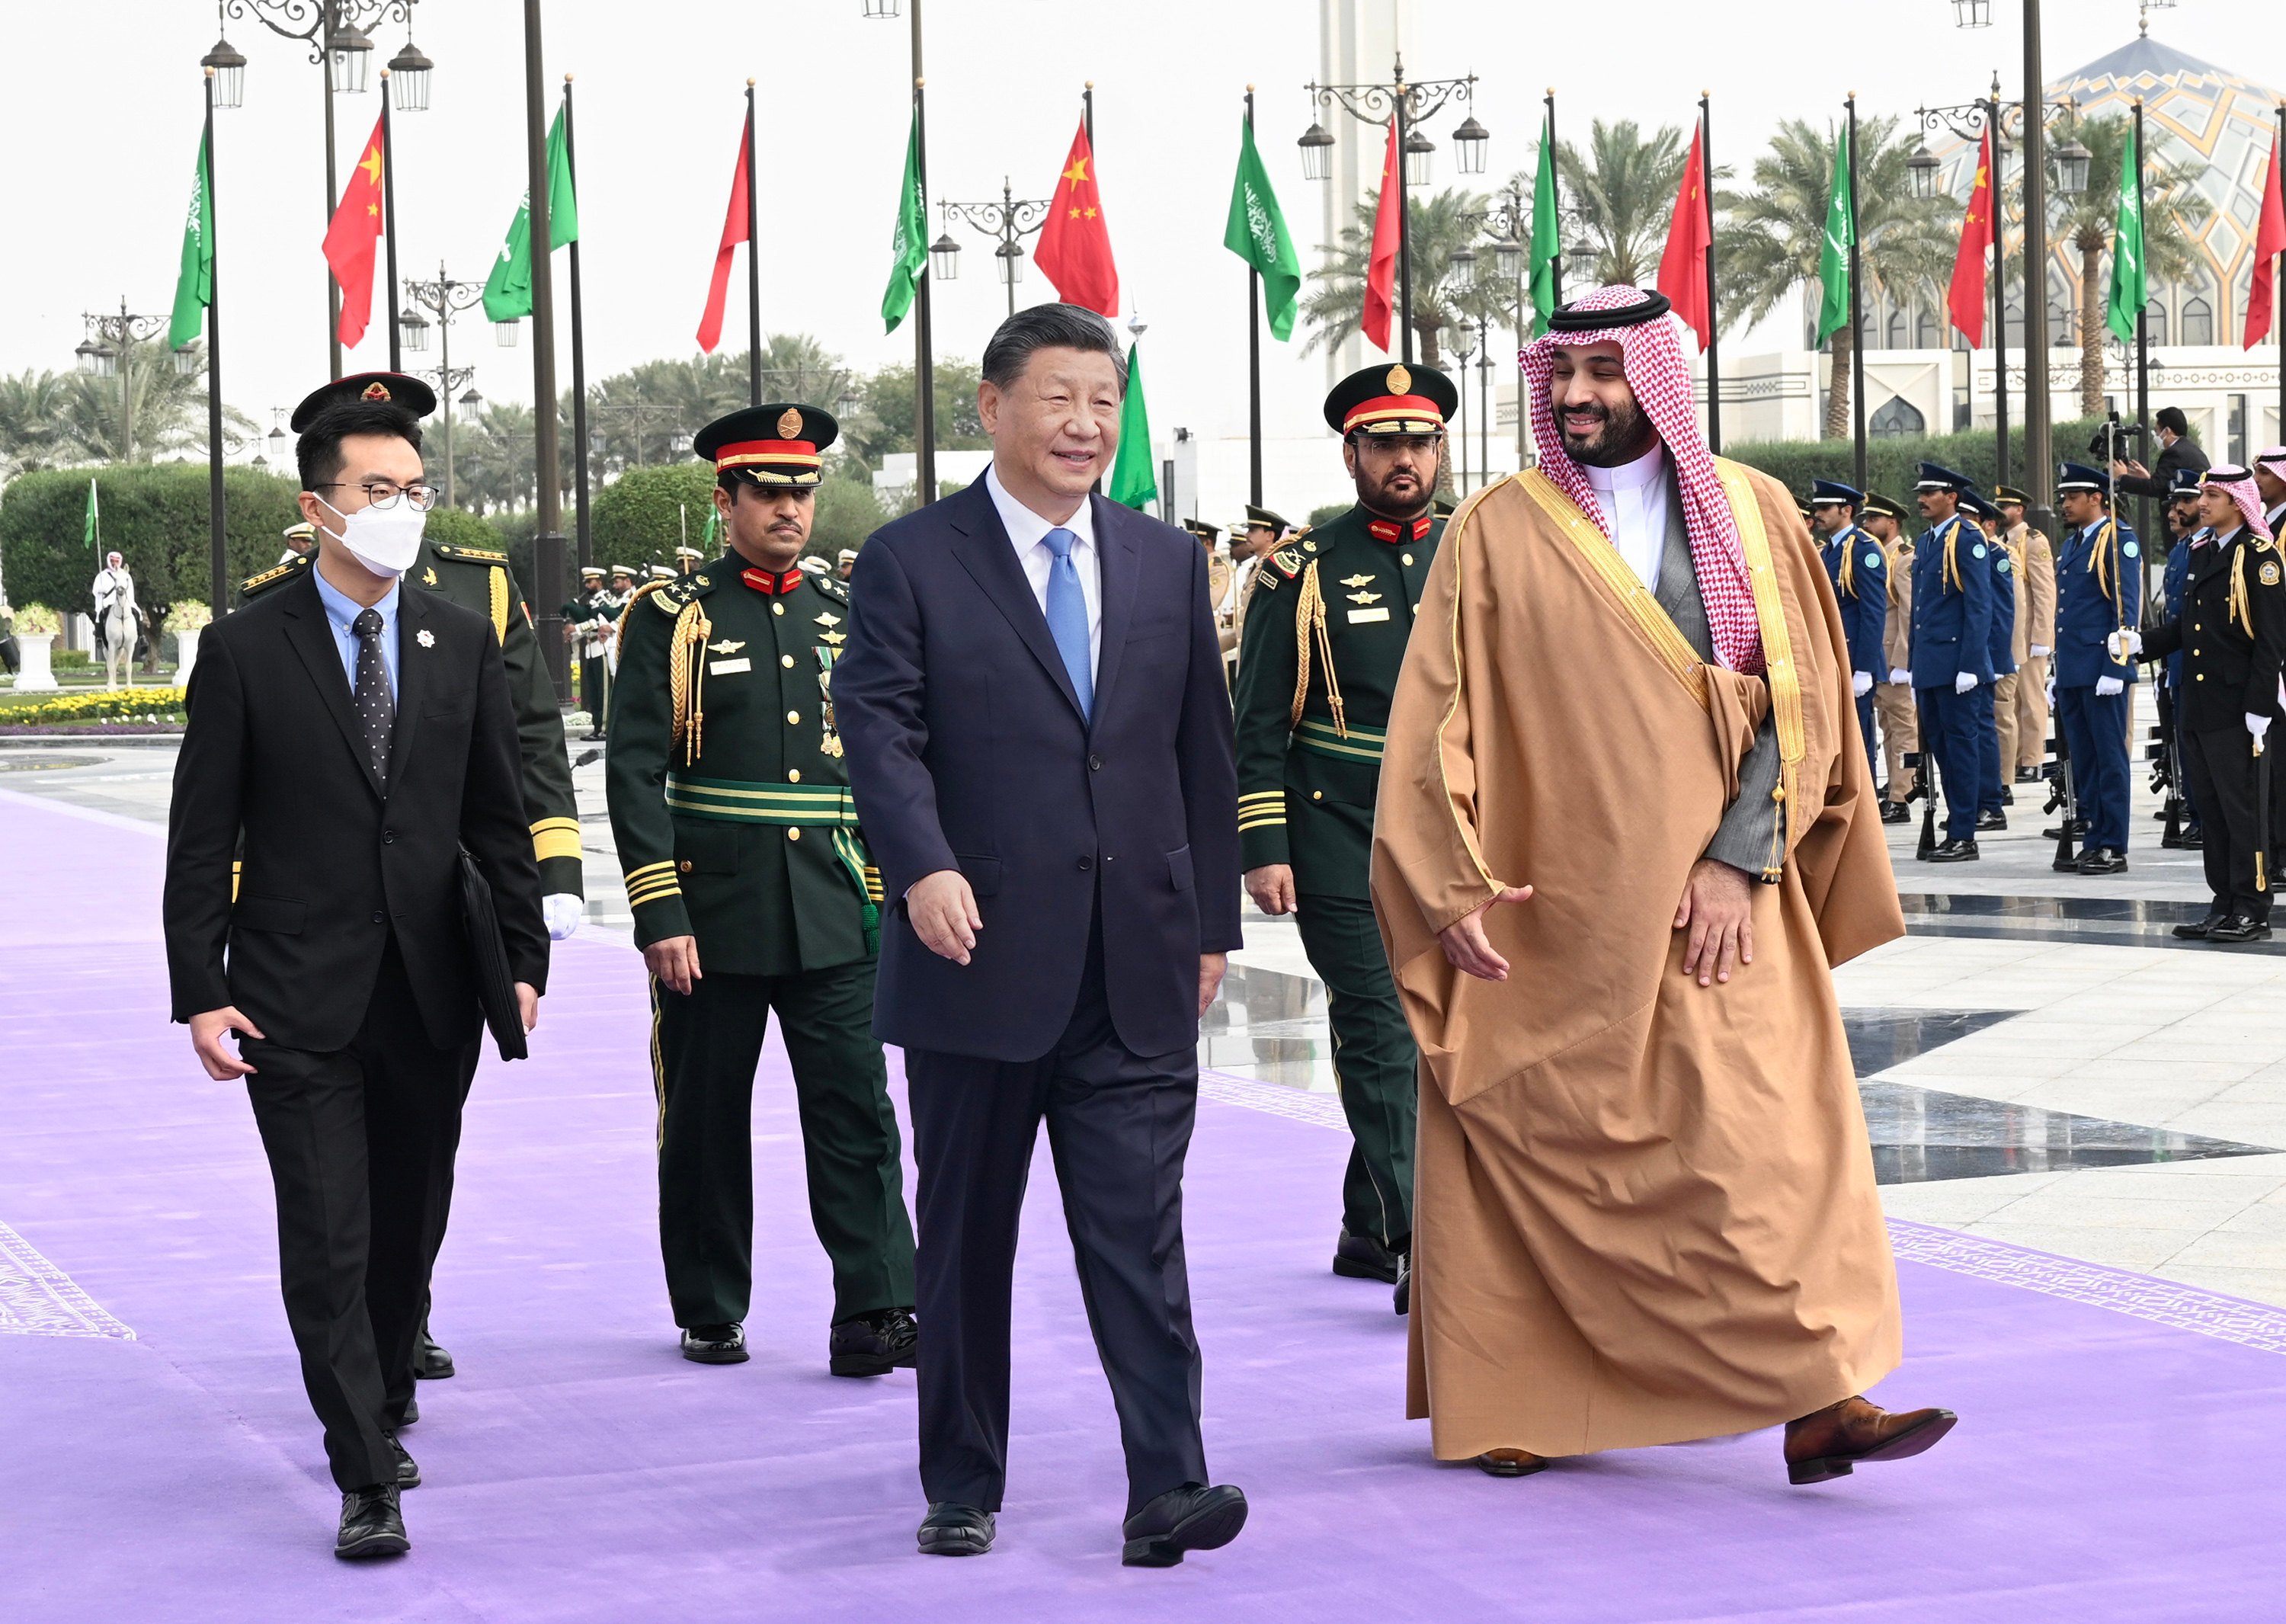 Chinese President Xi Jinping is welcomed by Saudi Crown Prince Mohammed Bin Salman during a state visit to Saudi Arabia in December. Photo: Xinhua via ZUMA Press